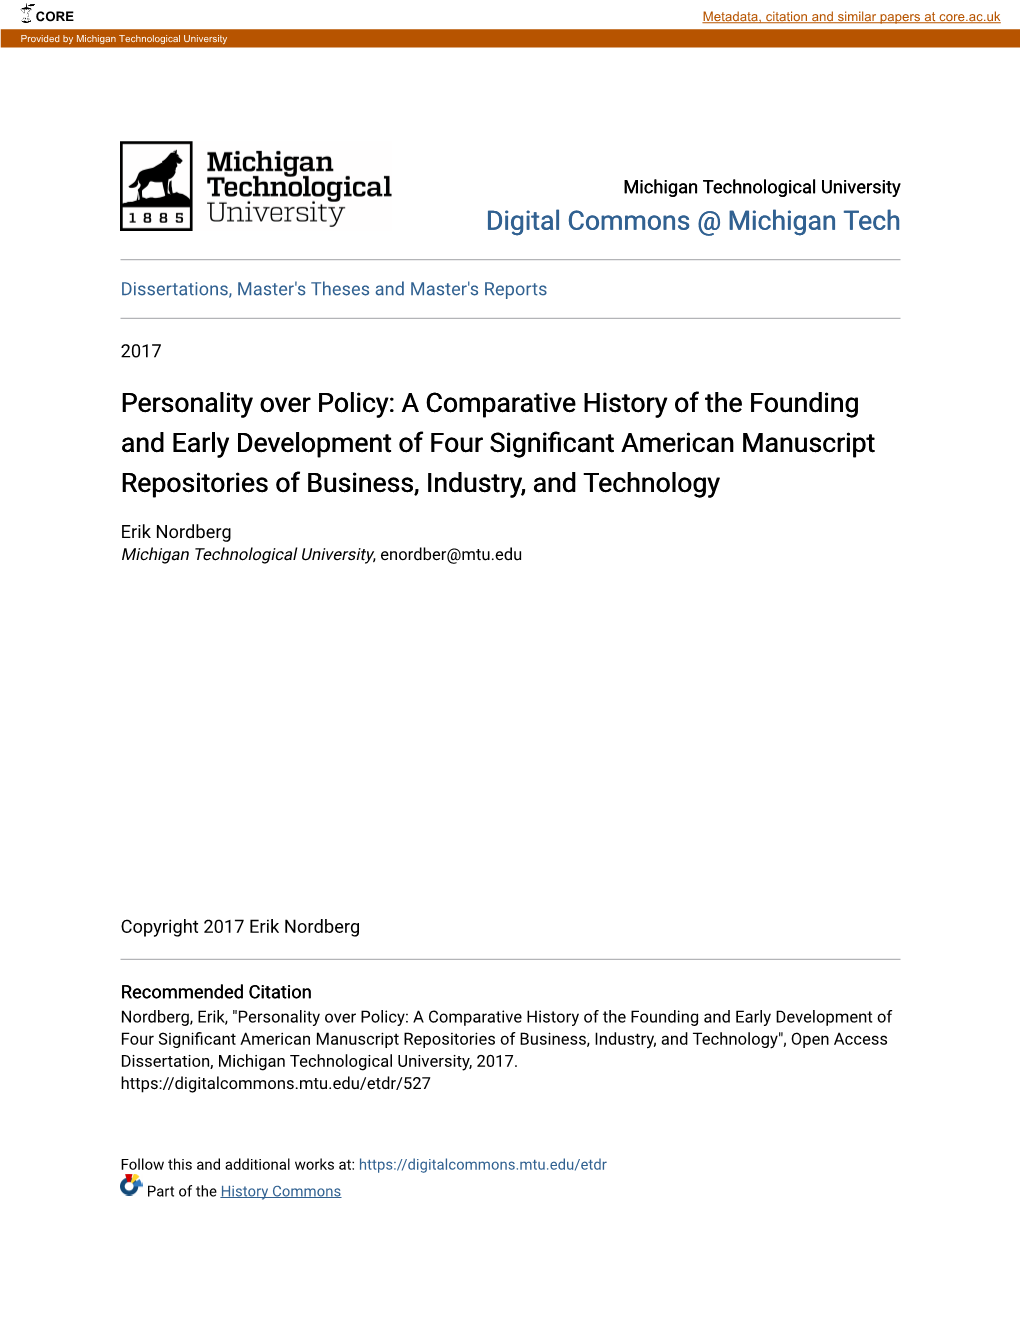 A Comparative History of the Founding and Early Development of Four Significant American Manuscript Repositories of Business, Industry, and Technology